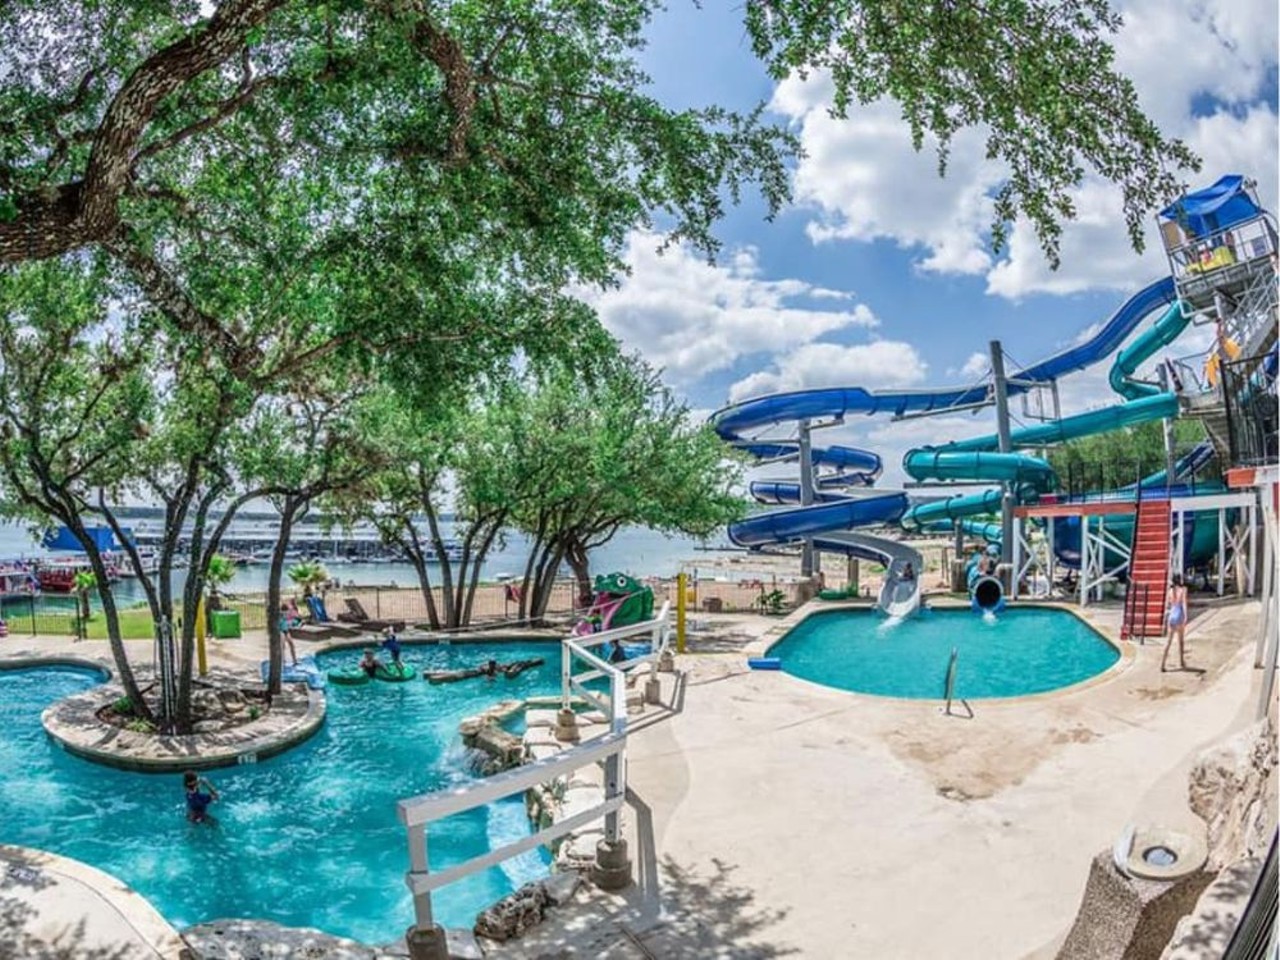 Volente Beach Resort & Waterpark
16107 Farm to Market Road 2769, Leander, (512) 258-5110, volentebeach.com
Pack up the car and take a day trip to this Central Texas spot. Not only is there a beach area, sand and all, but there are loads of water activities, including the Texas Twister, Gator’s Crossing, the Pirate Ship and lots of tubes! Dry off with a game or two of sand volleyball before you head back home.